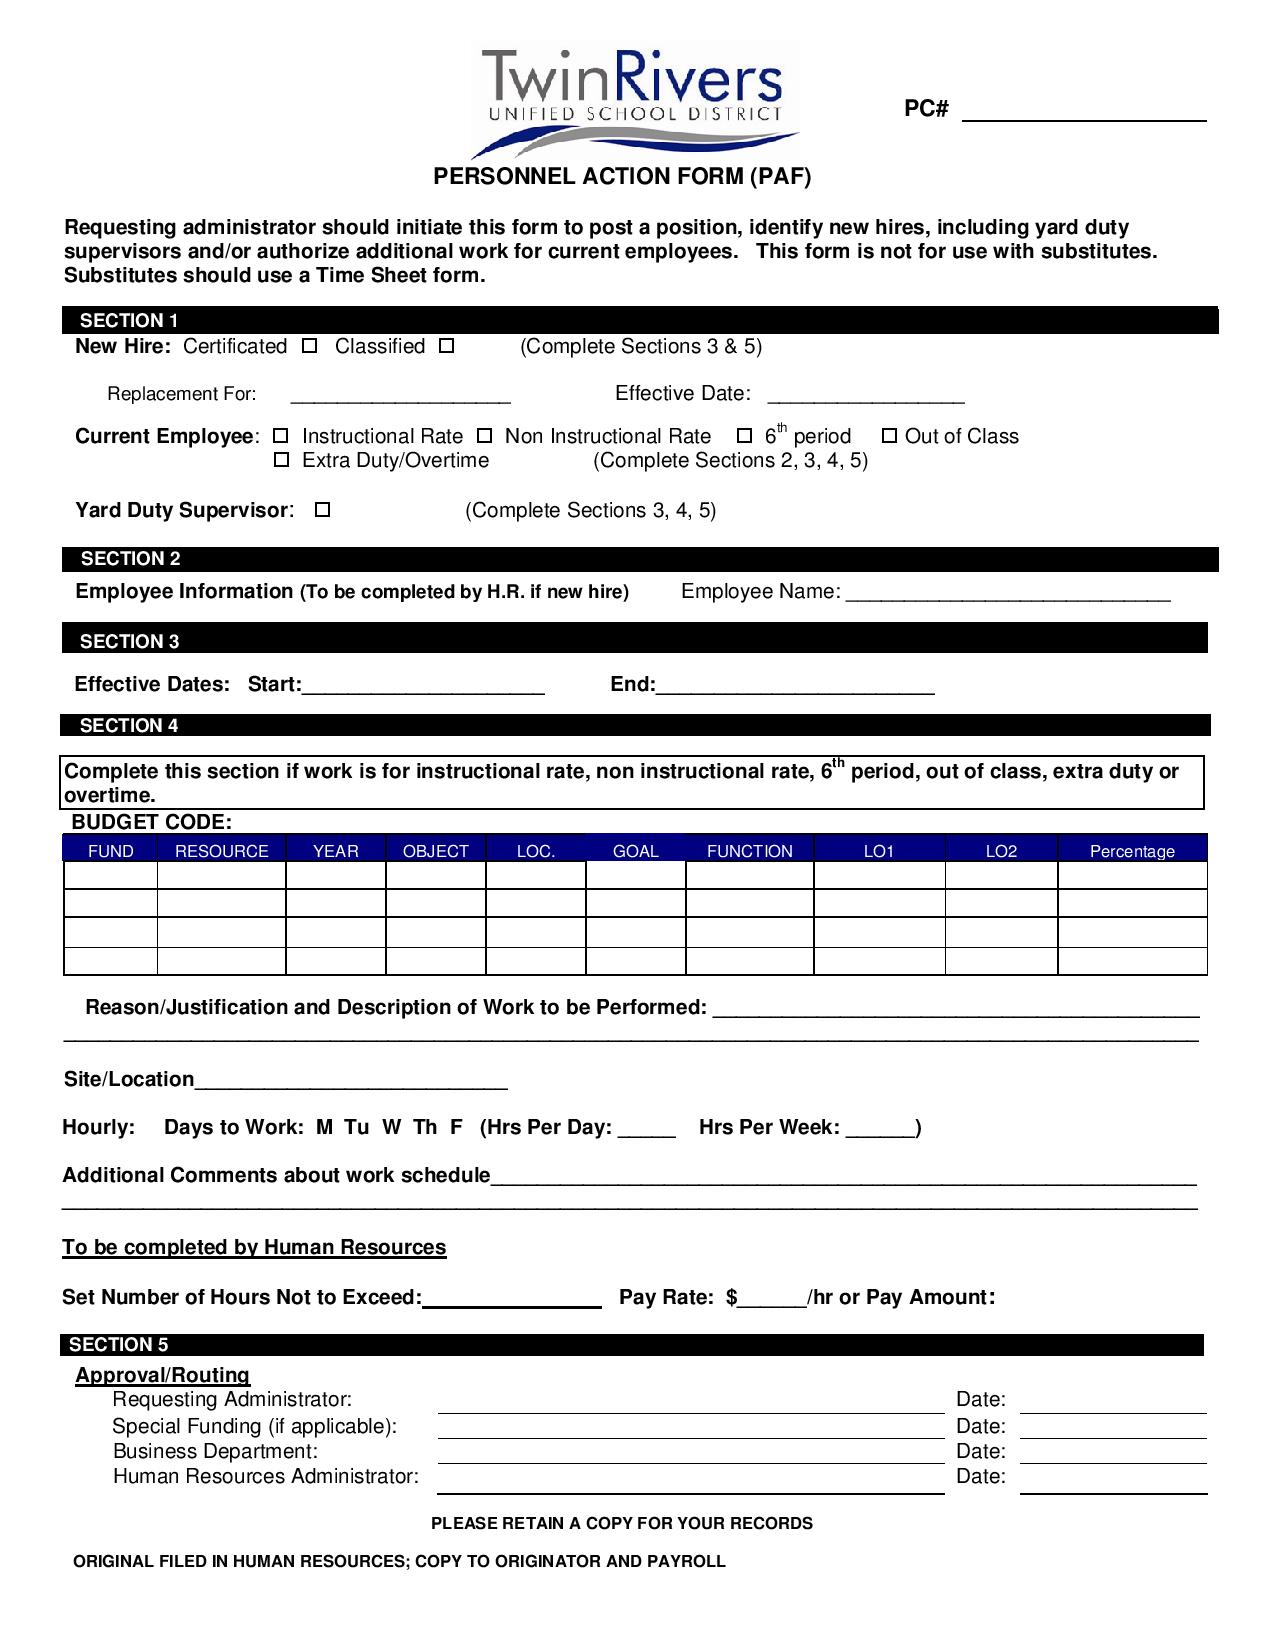 hr personnel action form in pdf page 001